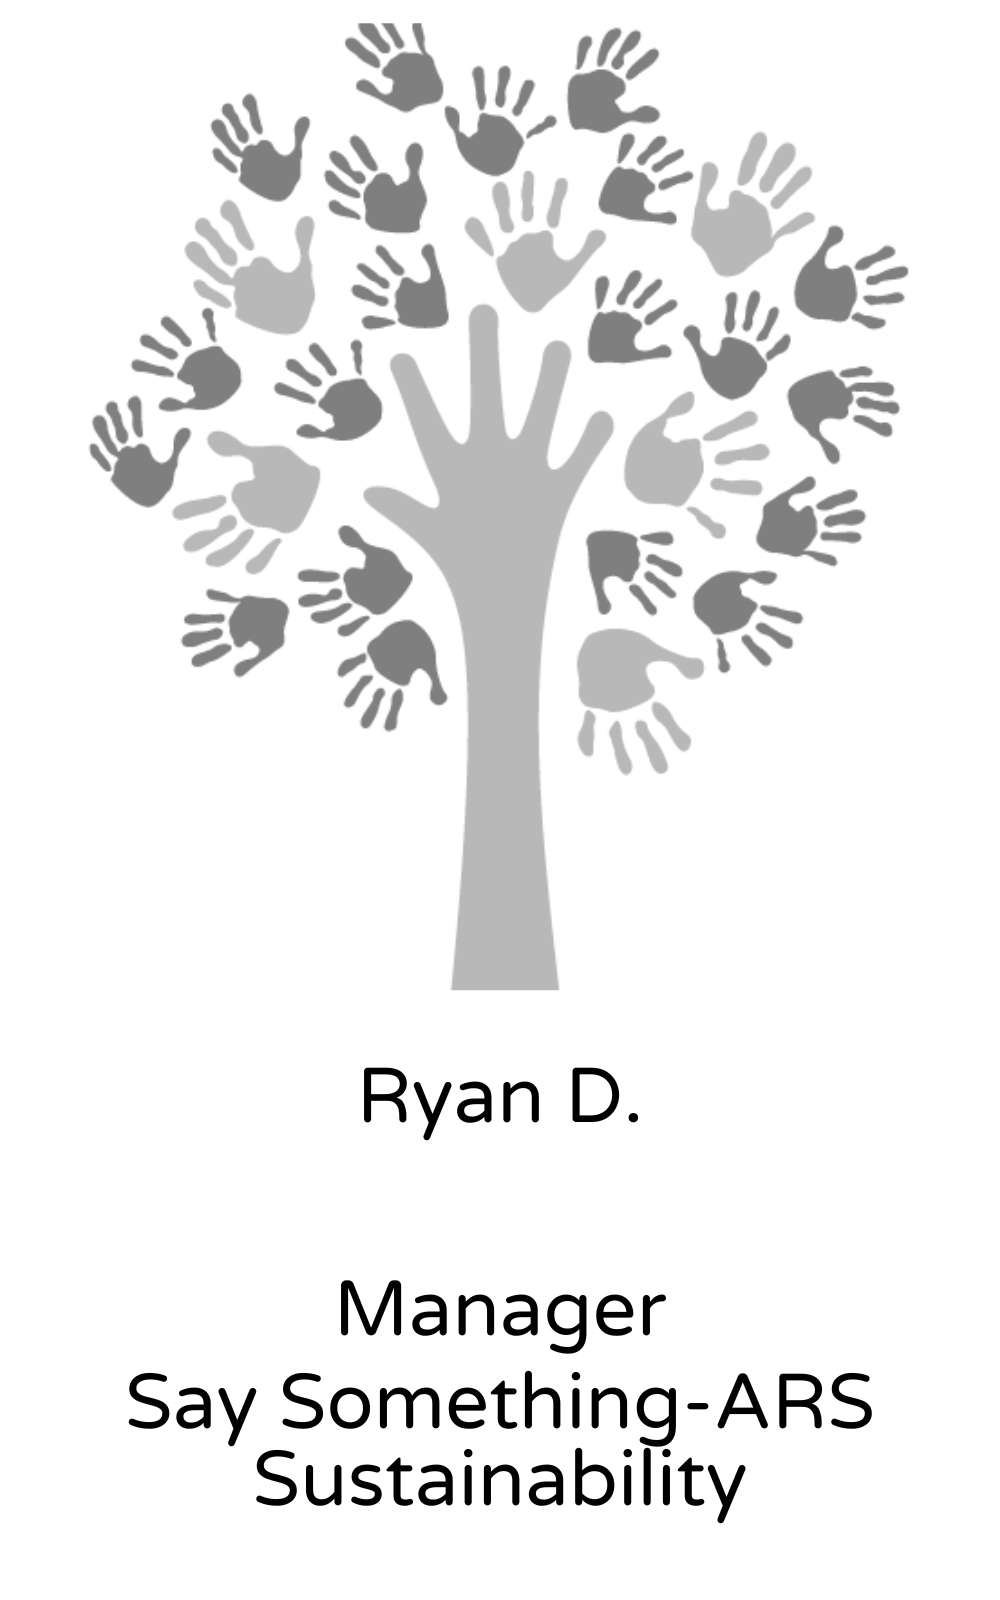 Ryan D., Manager, Say Something-ARS Sustainability